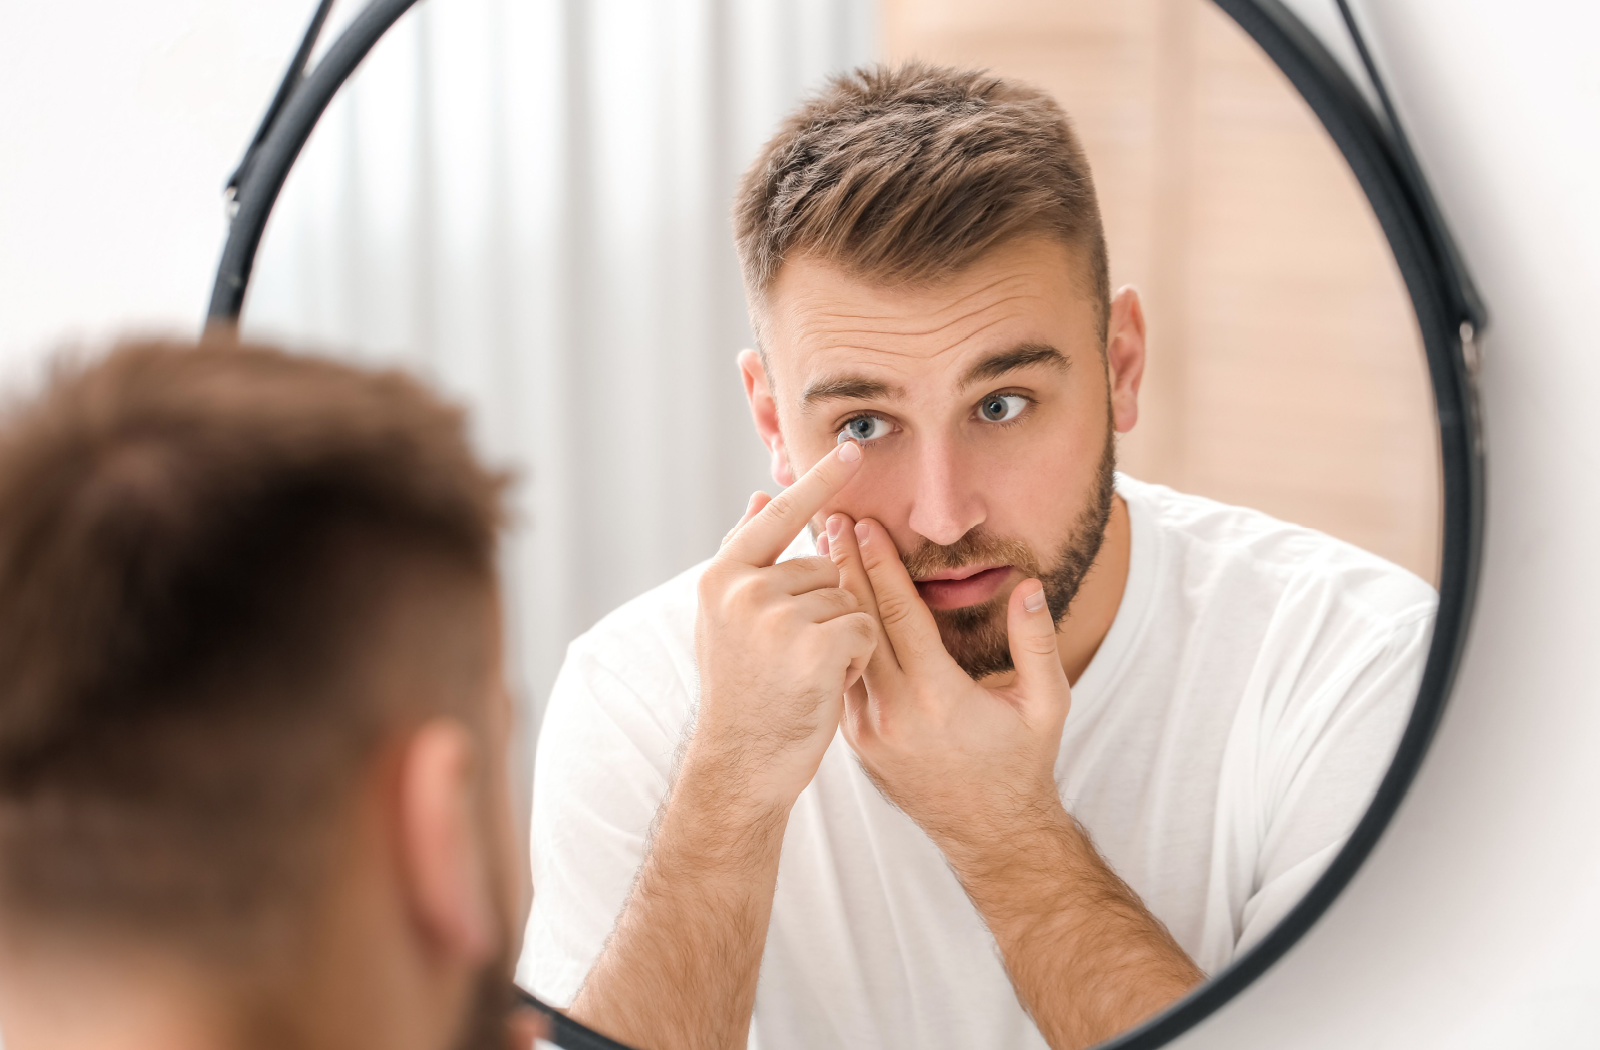 A young man looking into a mirror while he uses his left hand to put a contact lens in his left eye